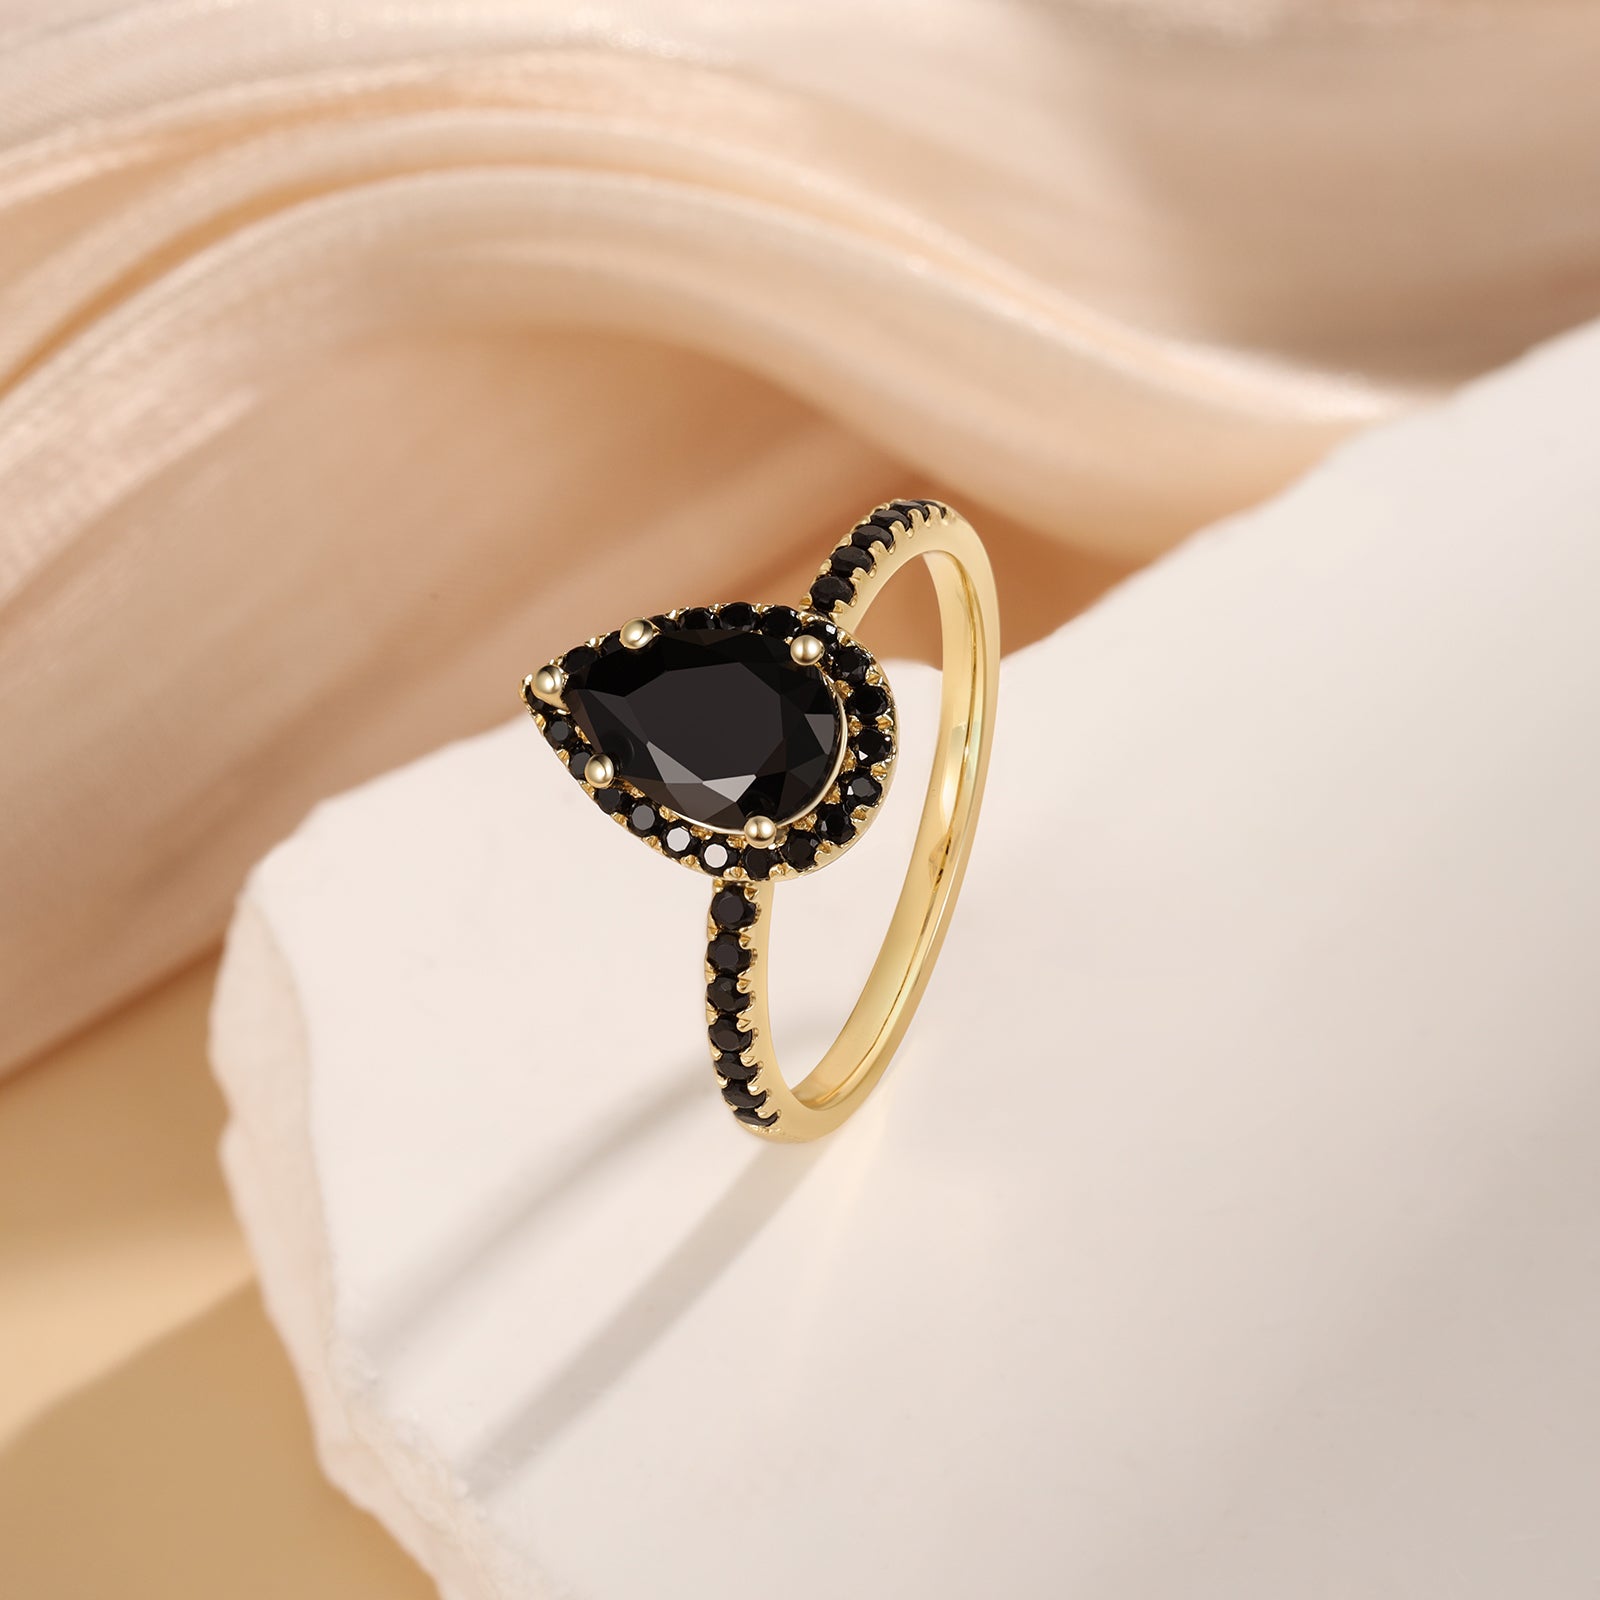 ThinkEngraved Womens Wedding Rings Women's Gold Promise Ring With a 1.33ct Pear Cut Black Onyx Stone